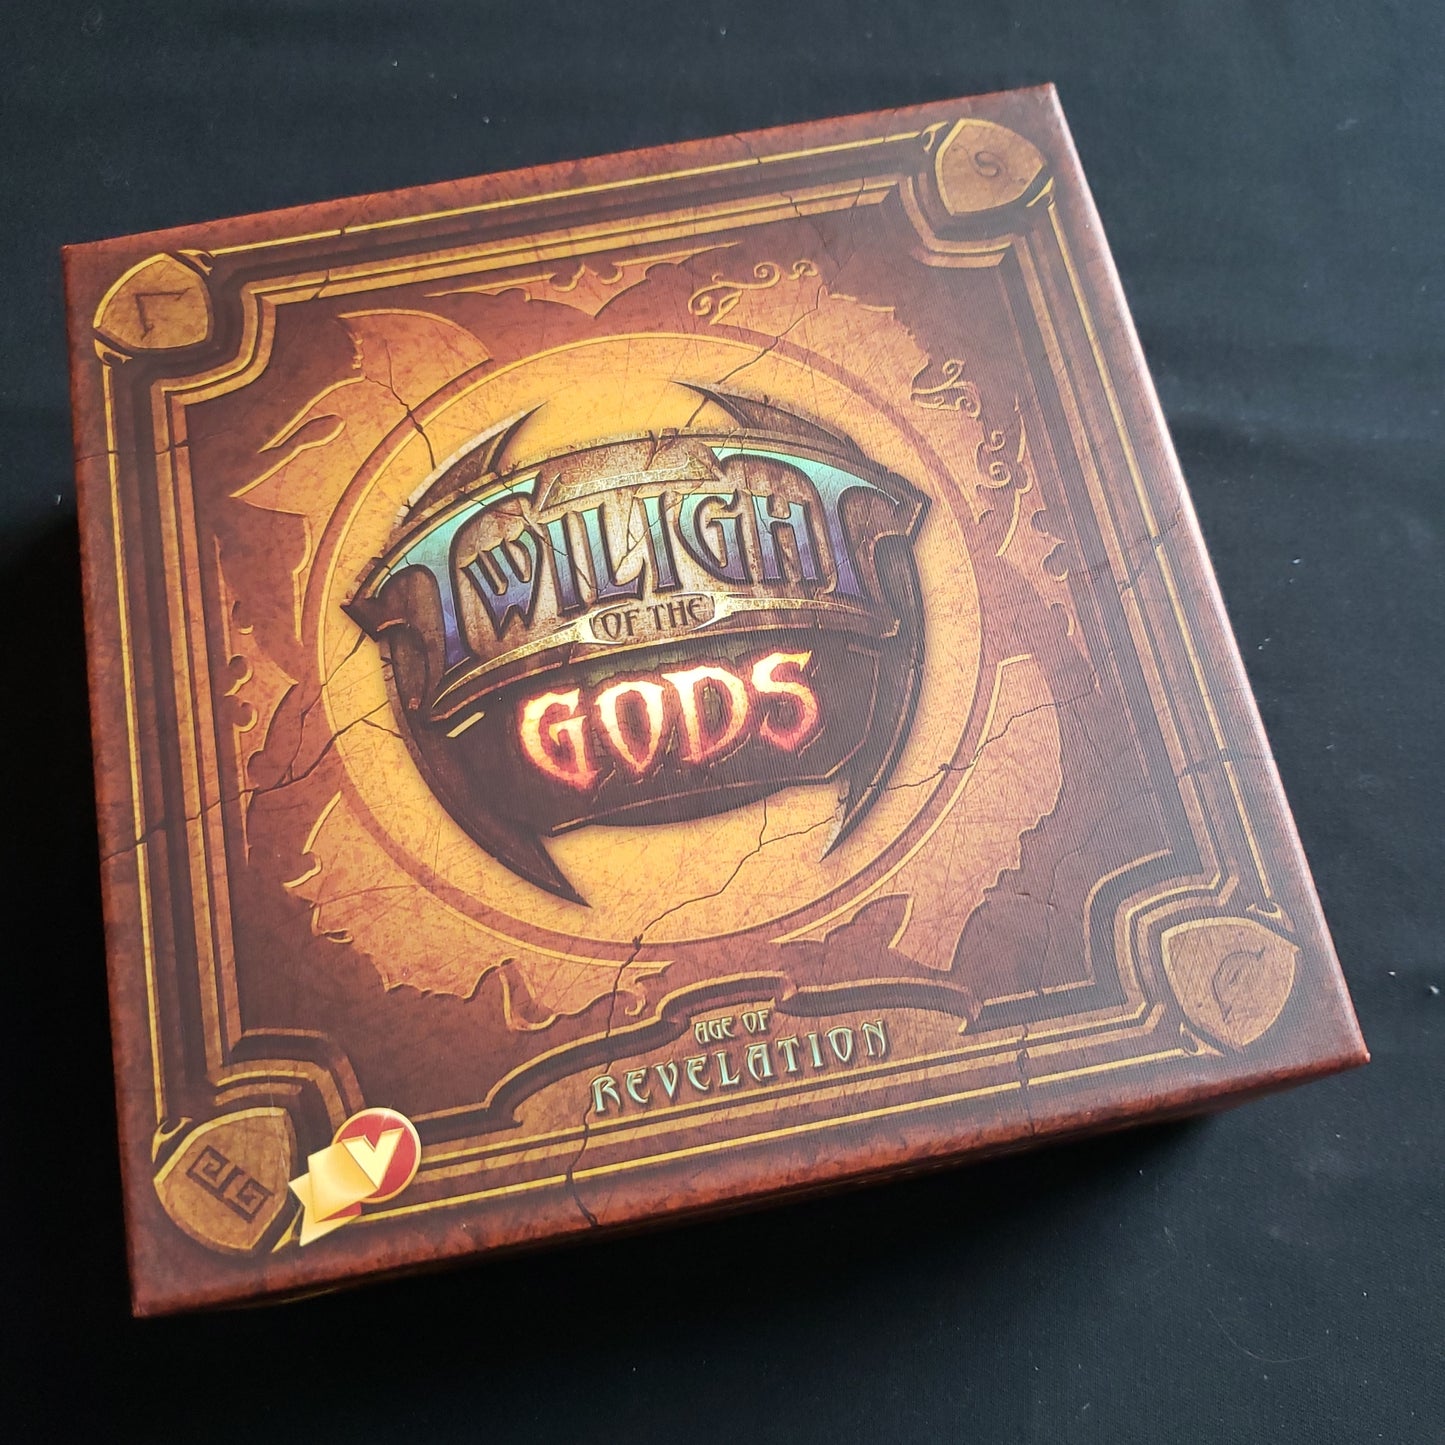 Image shows the front cover of the box of the Twilight of the Gods: Age of Revelation card game